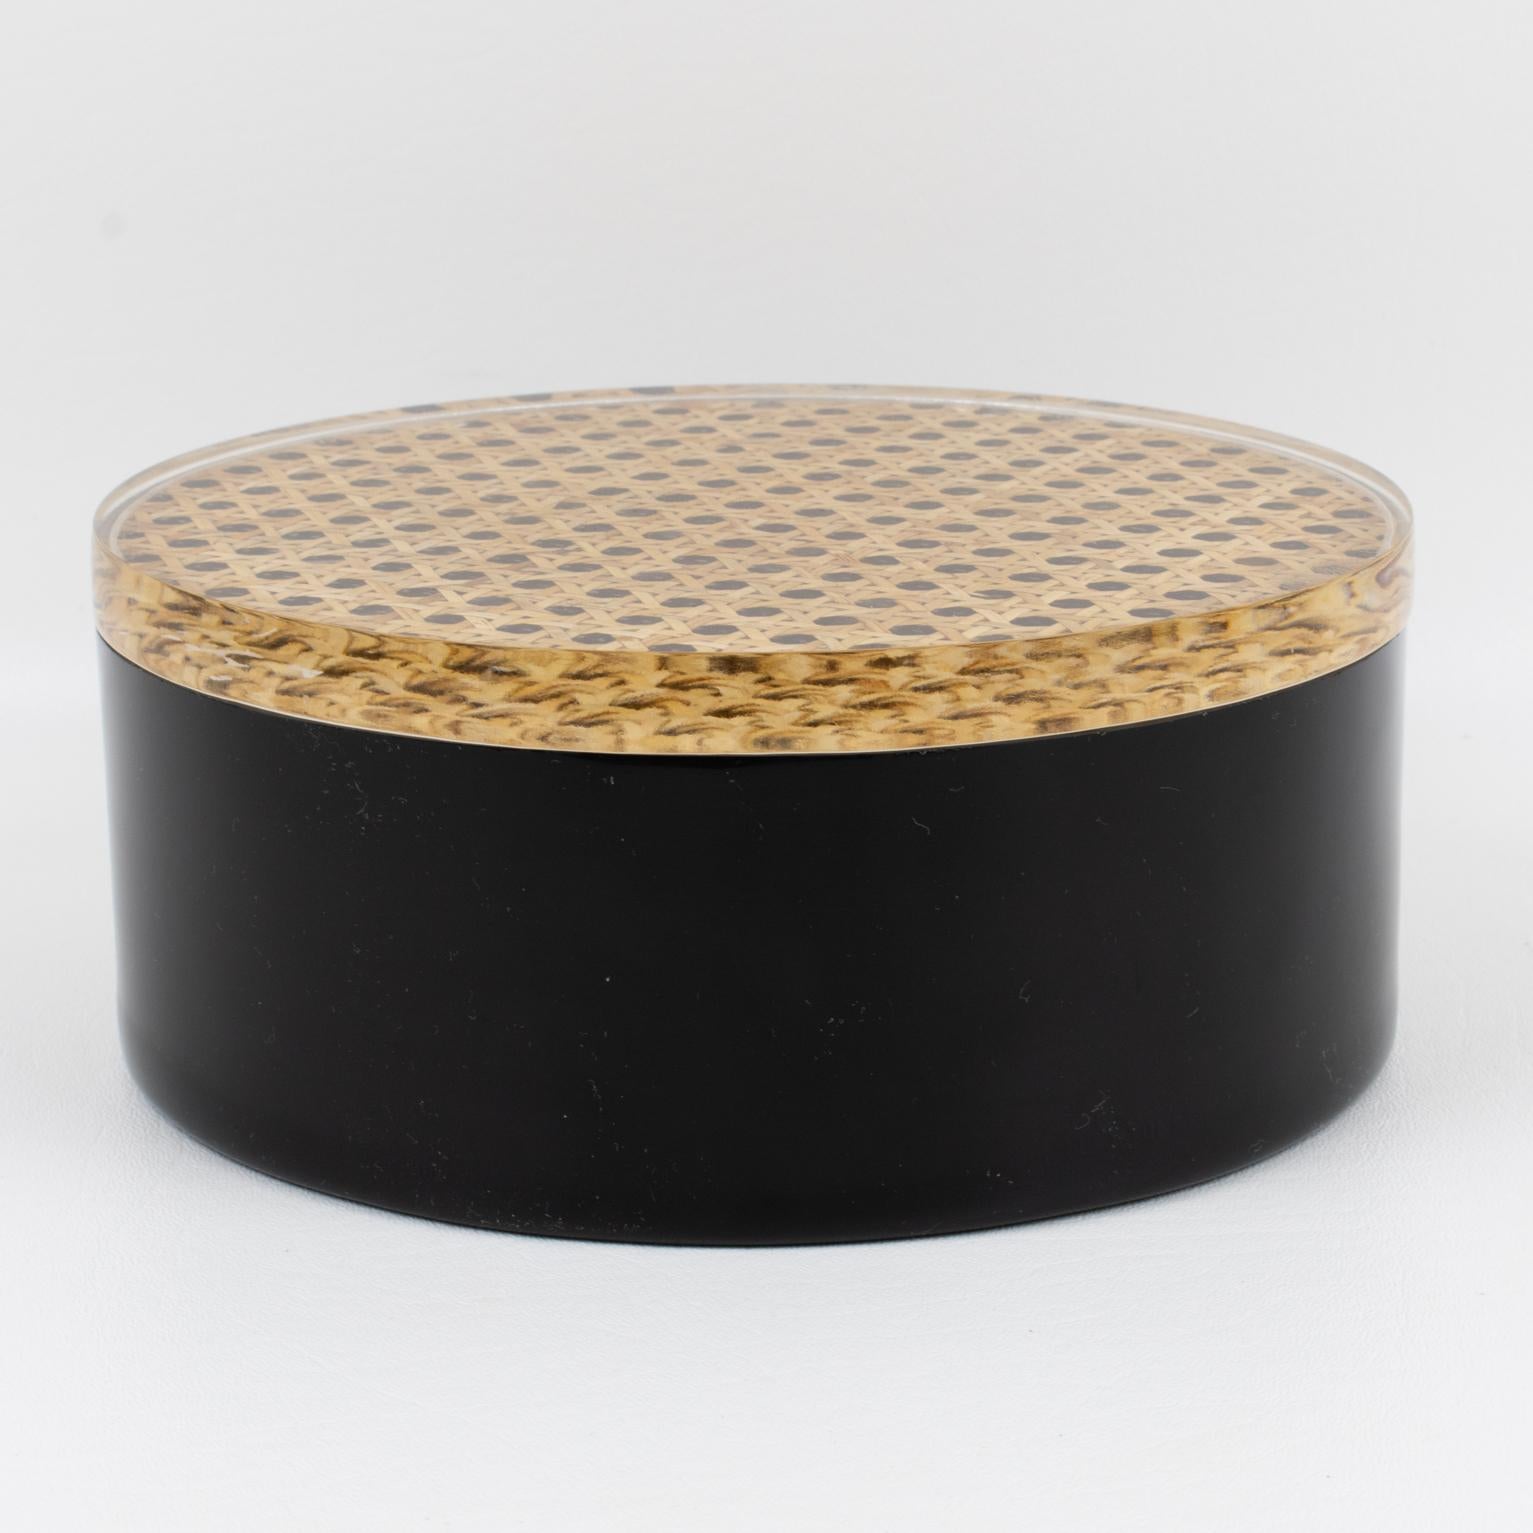 This decorative Italian Lucite lidded box was crafted in the 1970s. The piece boasts a rounded shape with a base in true licorice black Lucite topped with a lid in crystal clear Lucite with natural rattan, wicker, or cane work embedded in the